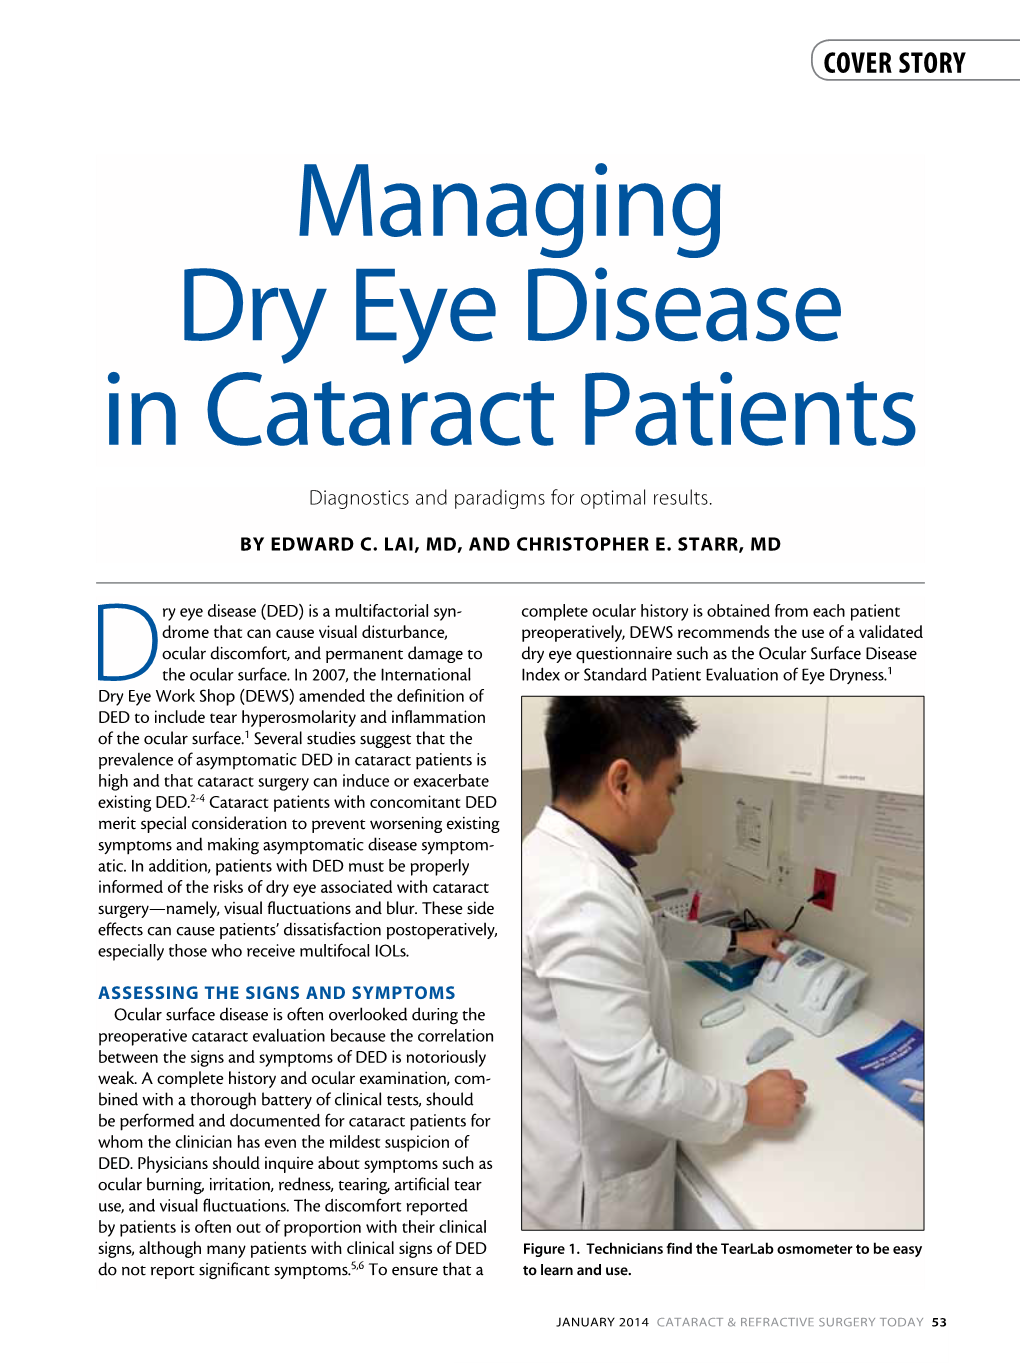 Managing Dry Eye Disease in Cataract Patients Diagnostics and Paradigms for Optimal Results